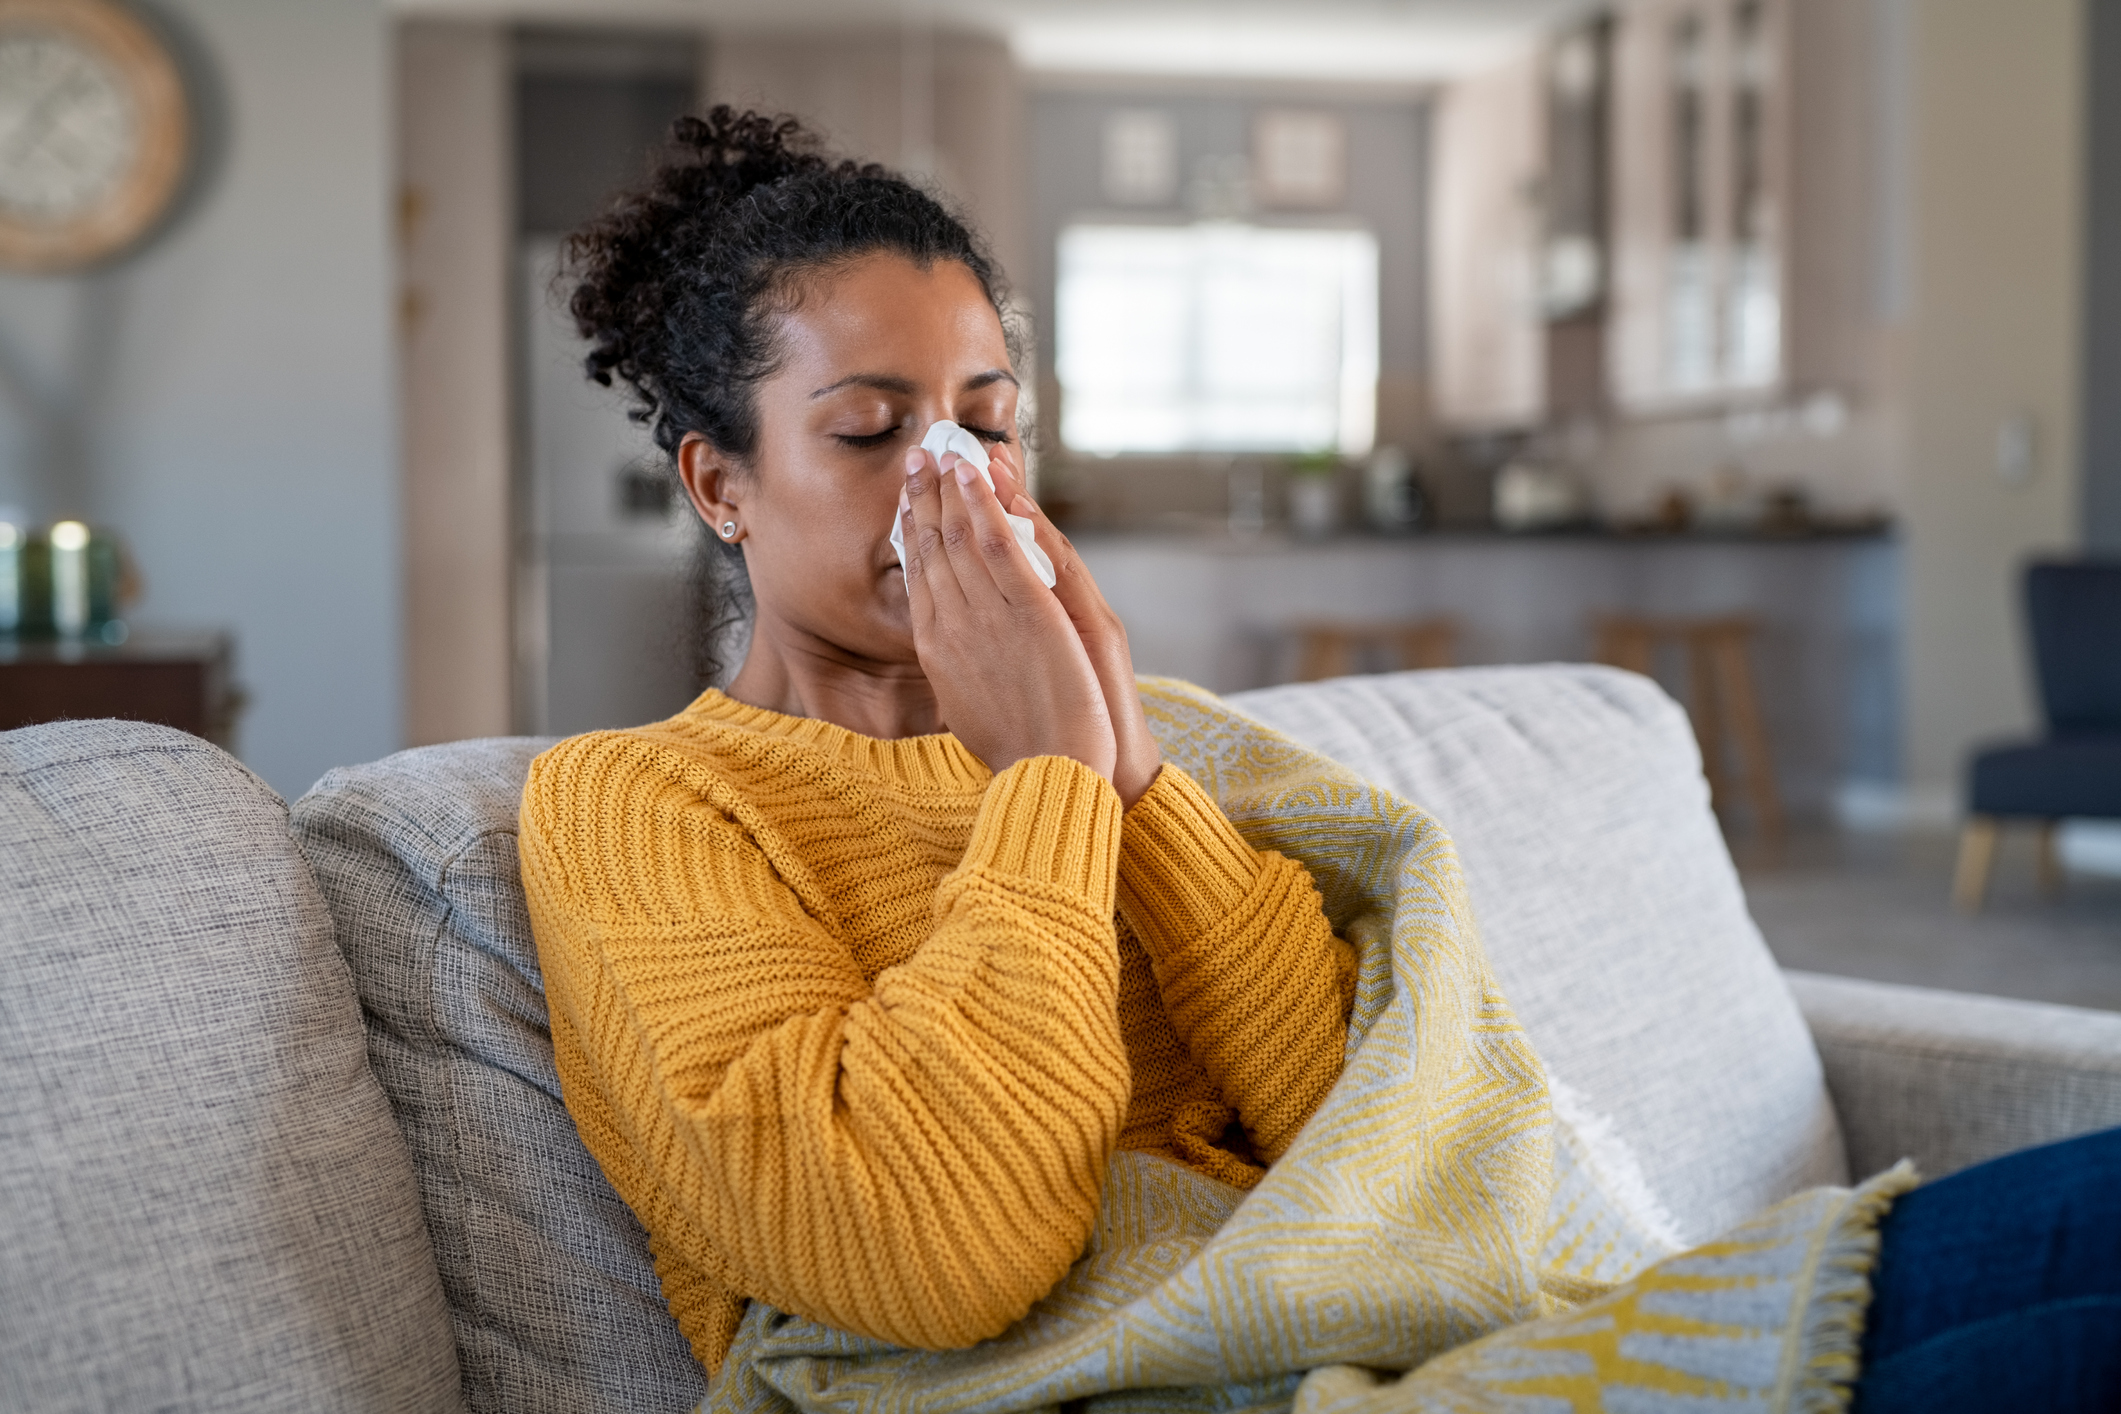 How Long Does Flu Last, Treatments Explained As Cases at PreCOVID Levels